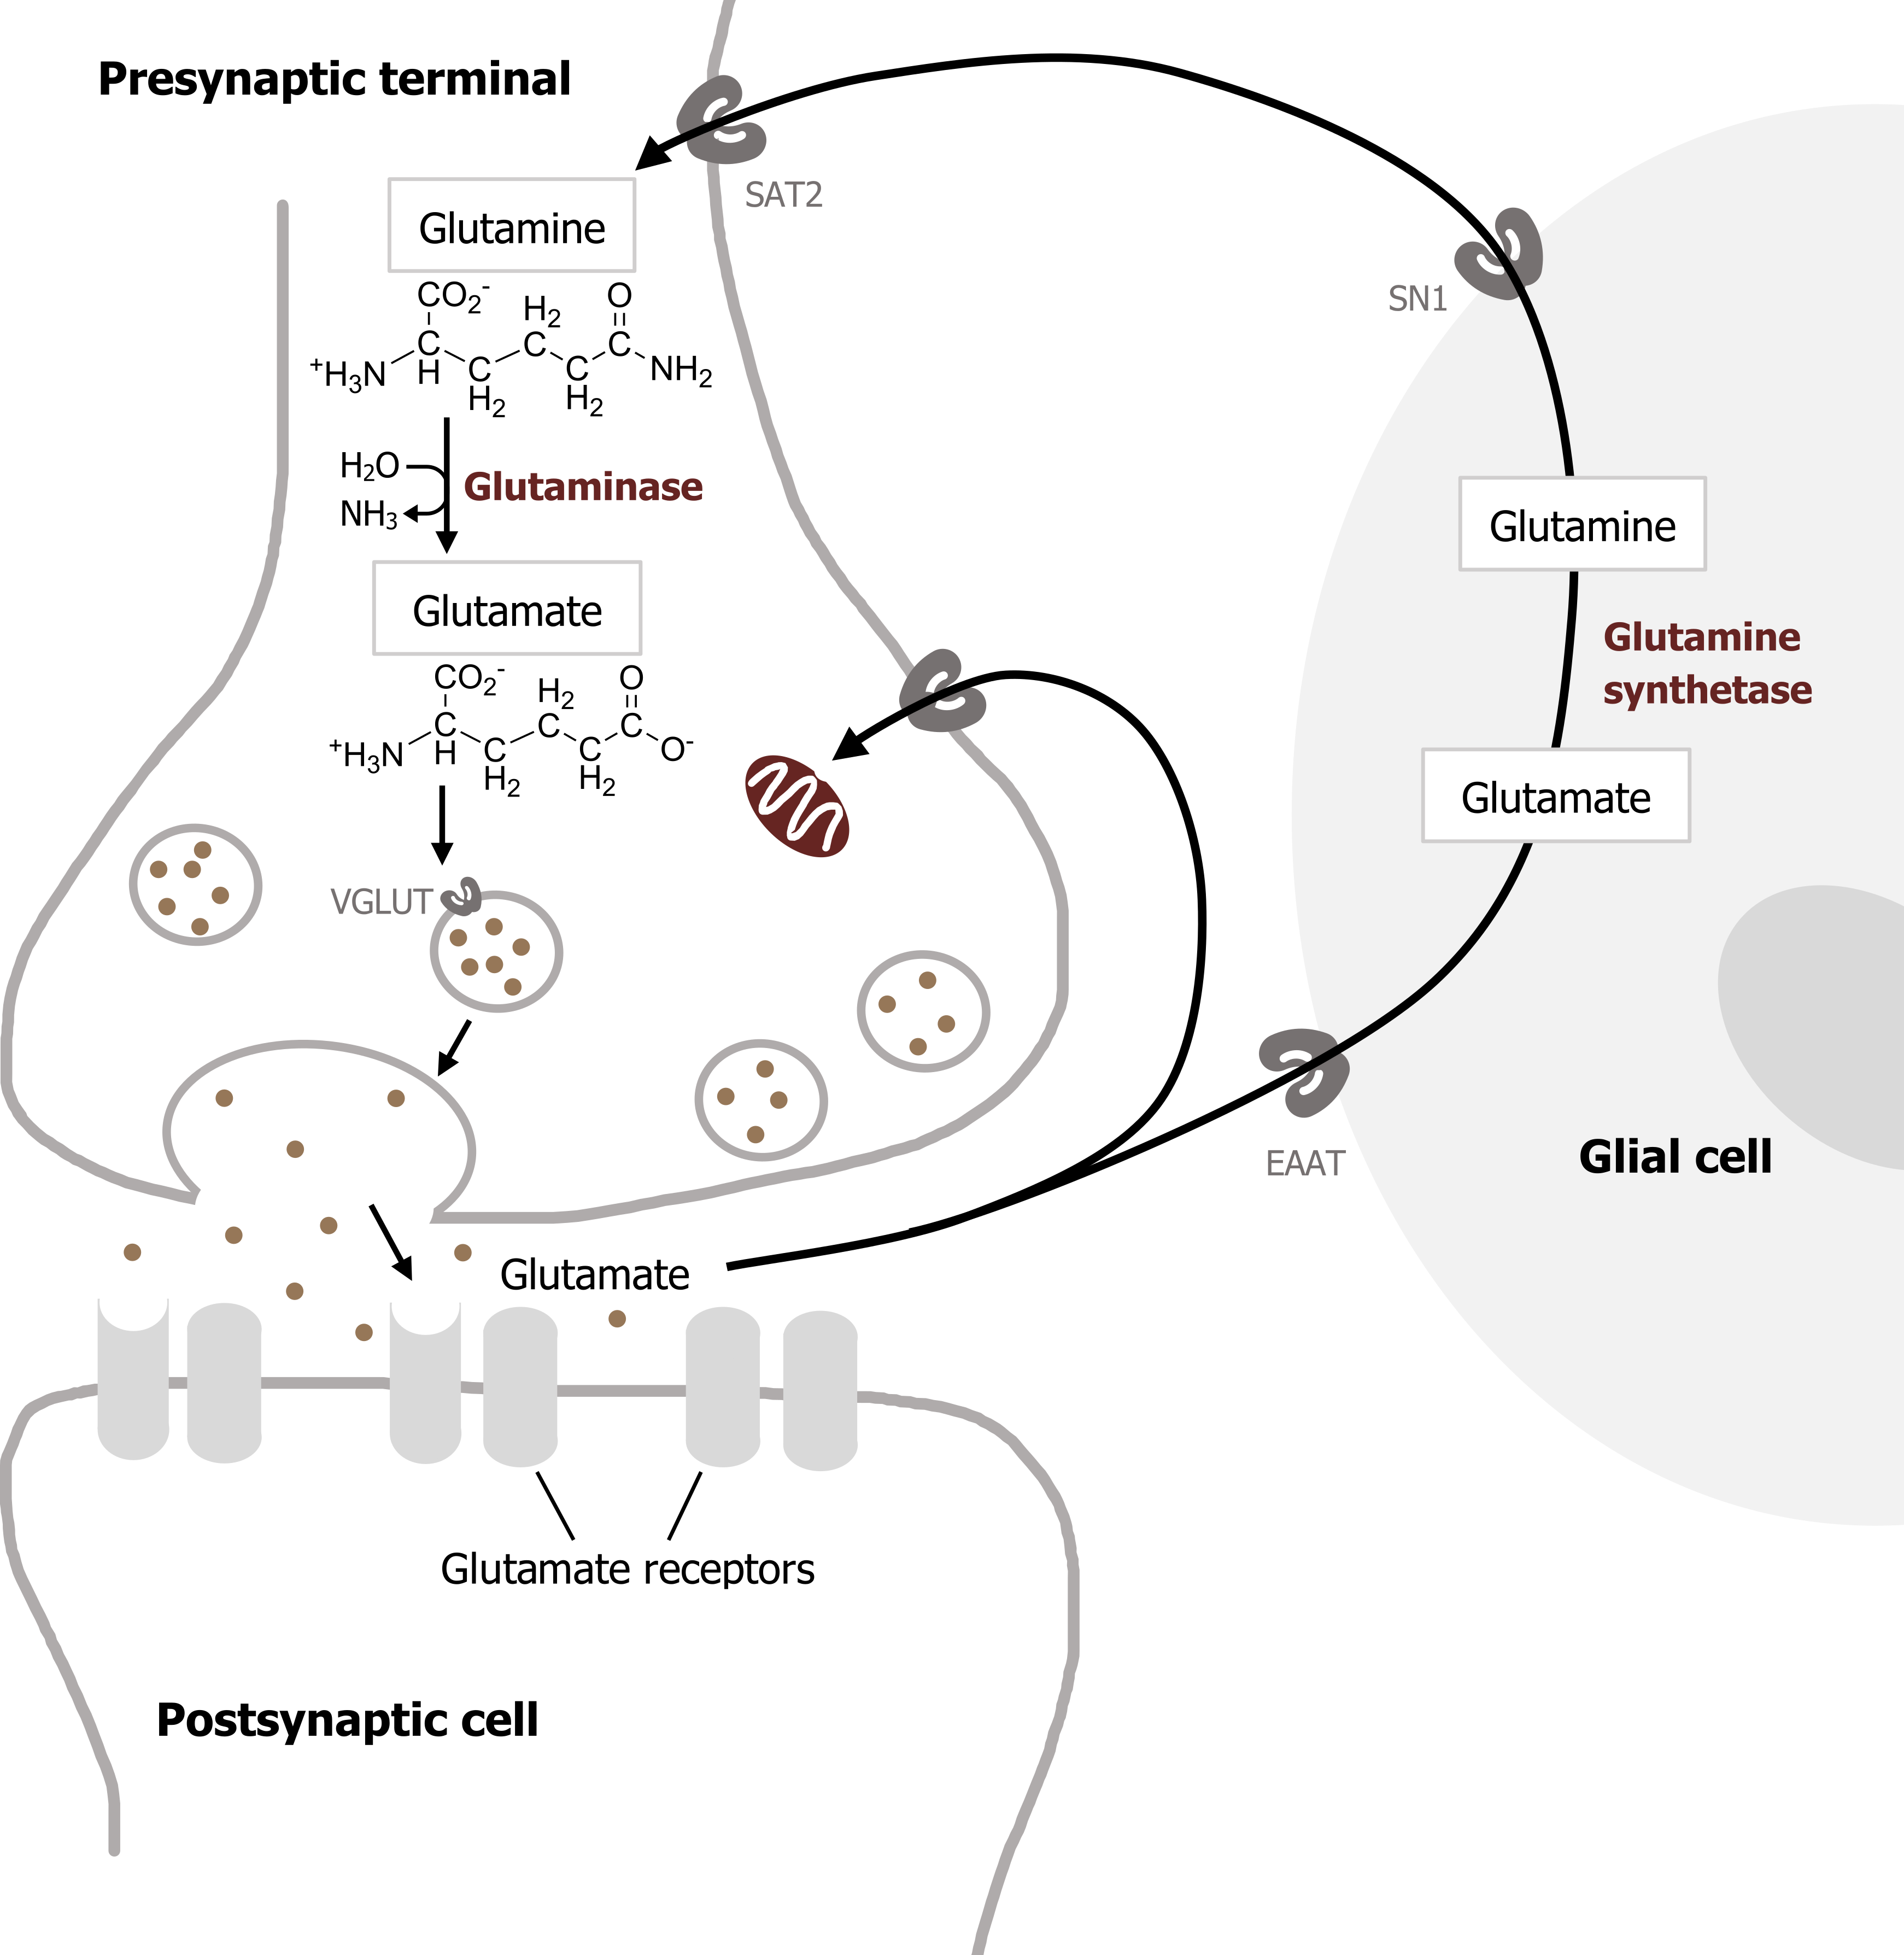 Presynaptic terminal over a postsynaptic cell and both are next to a glial cell. In the presynaptic terminal, glutamine arrow with enzyme glutaminase and H2O arrow NH3 to glutamate arrow vesicle with VGLUT arrow released to the synaptic cleft arrow glutamate receptors on the postsynaptic cell. Glutamate arrow EAAT into glial cell arrow with enzyme glutamine synthetase to glutamine arrow SN1 arrow SAT2 into the presynaptic terminal